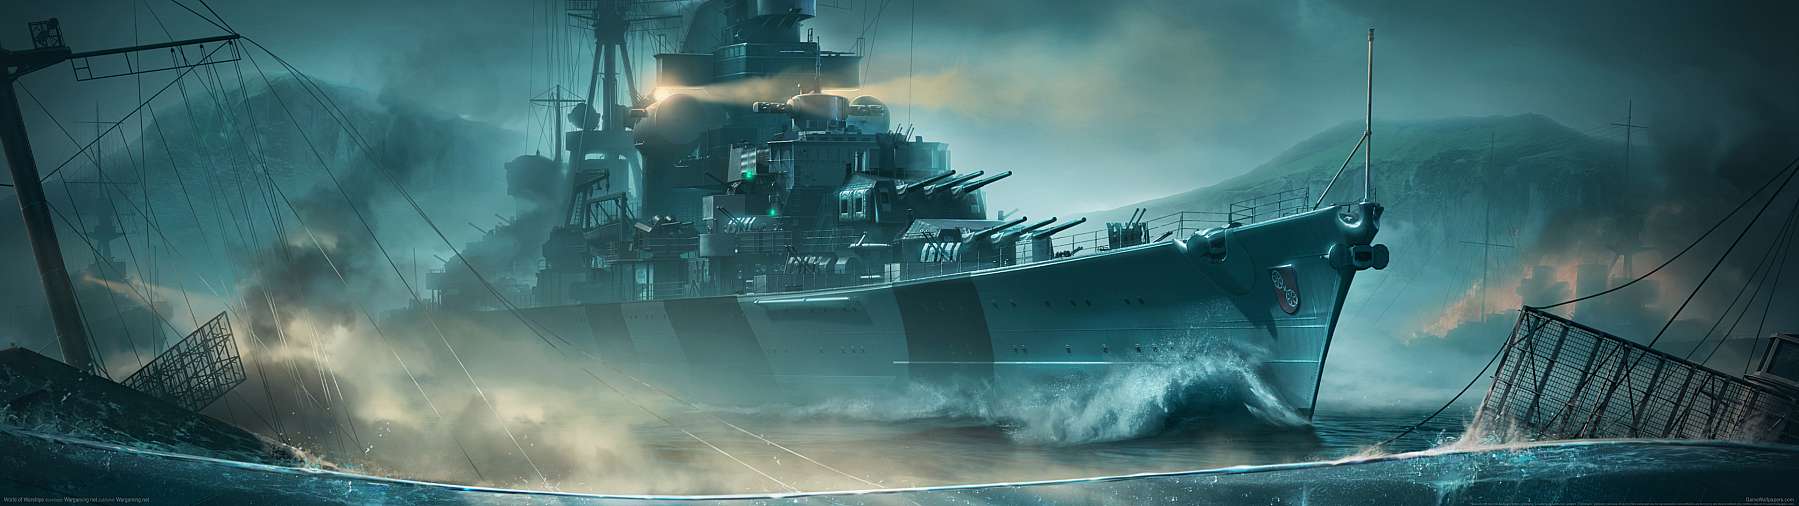 World of Warships superwide achtergrond 28